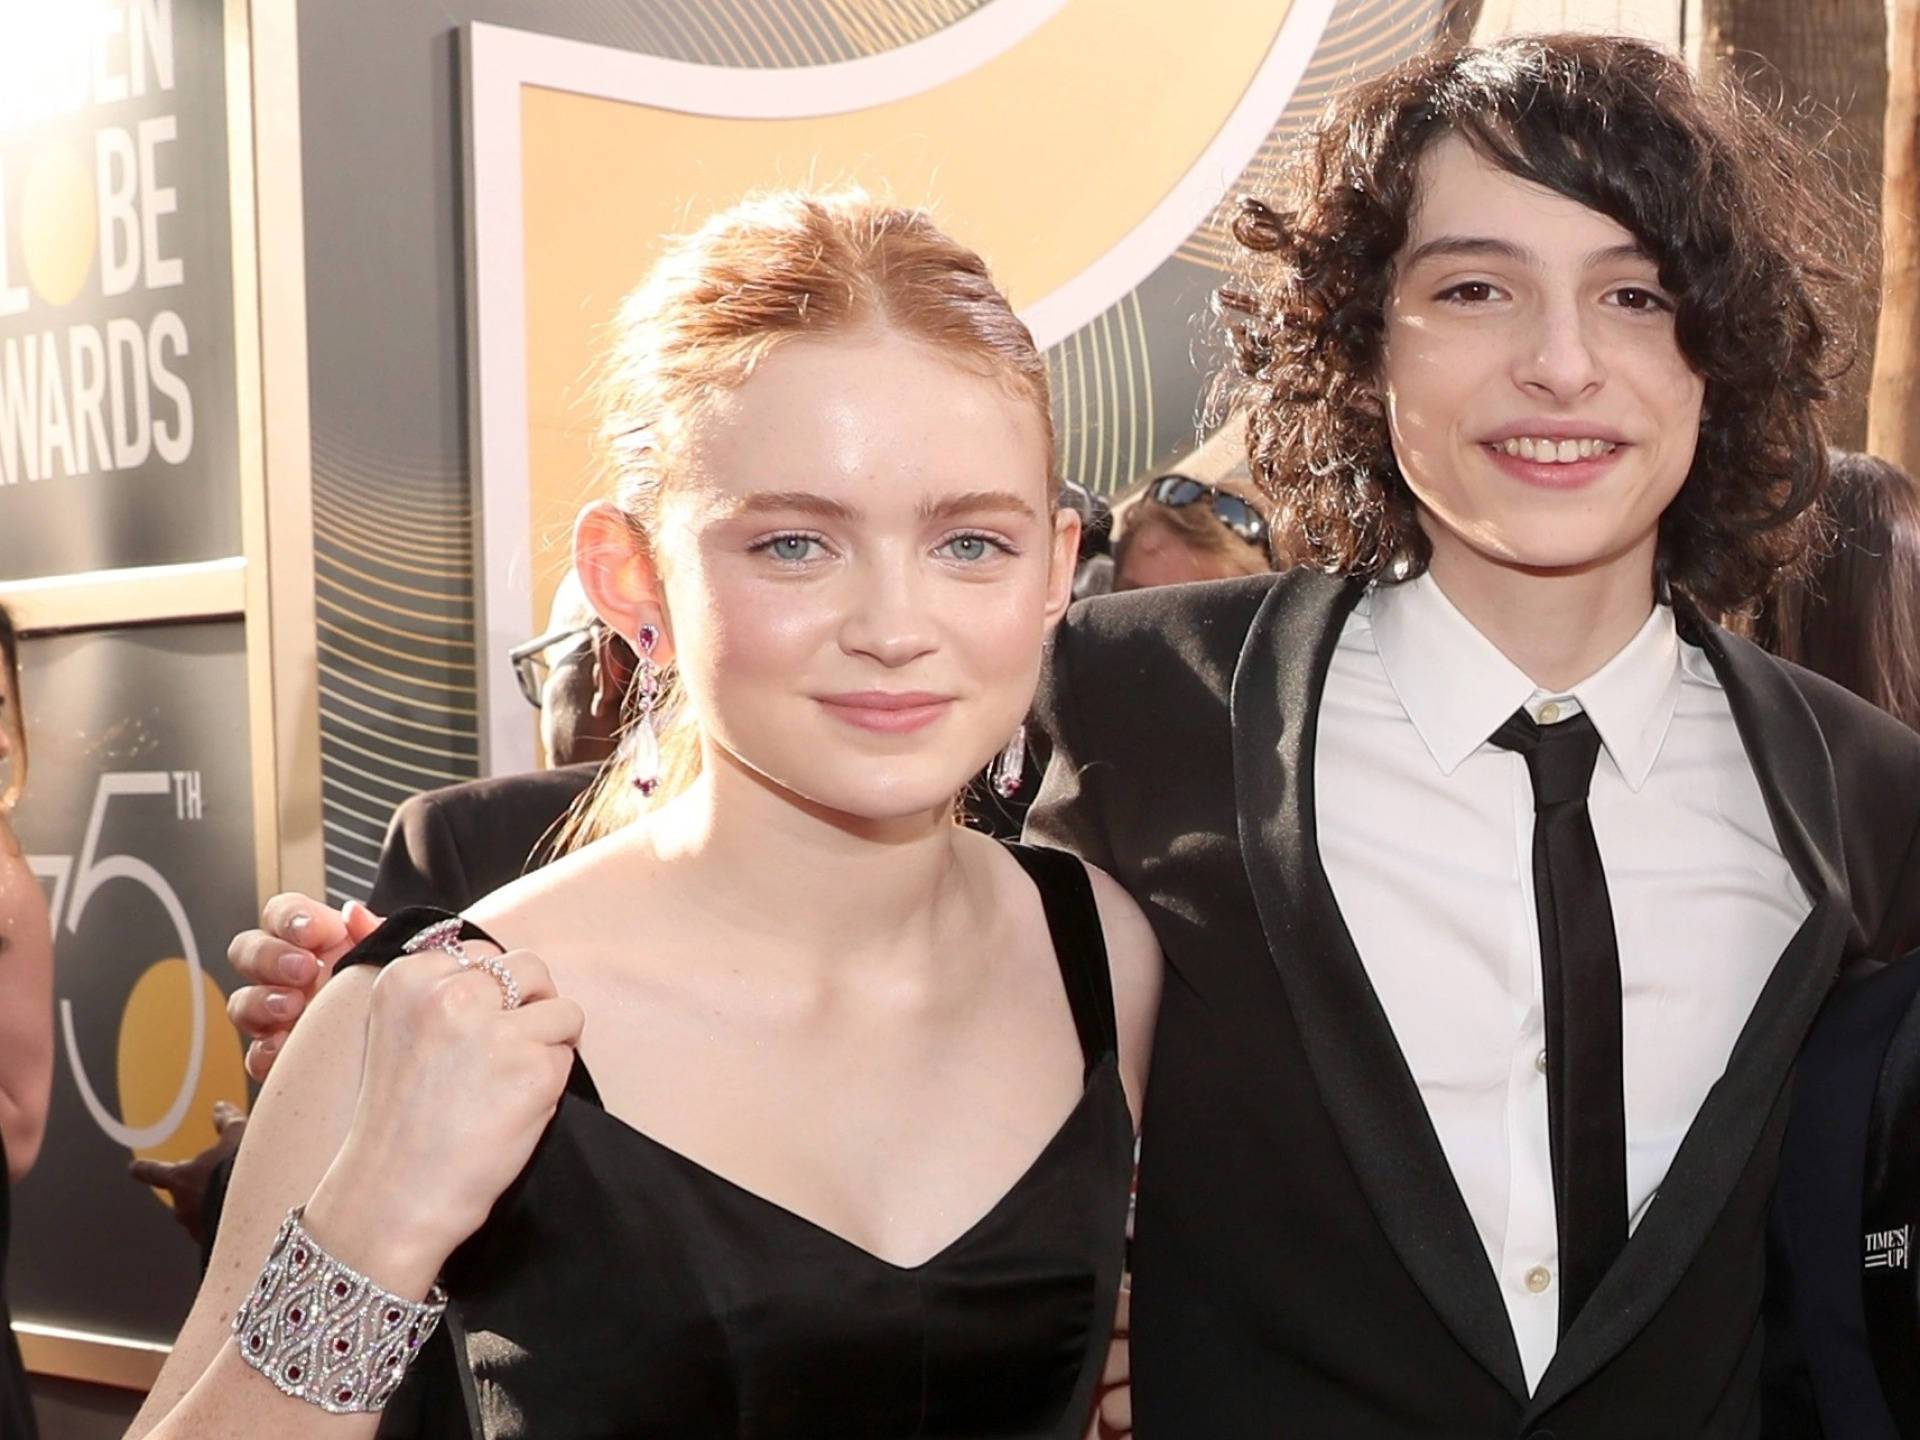 Finn Wolfhard With Co-star Background